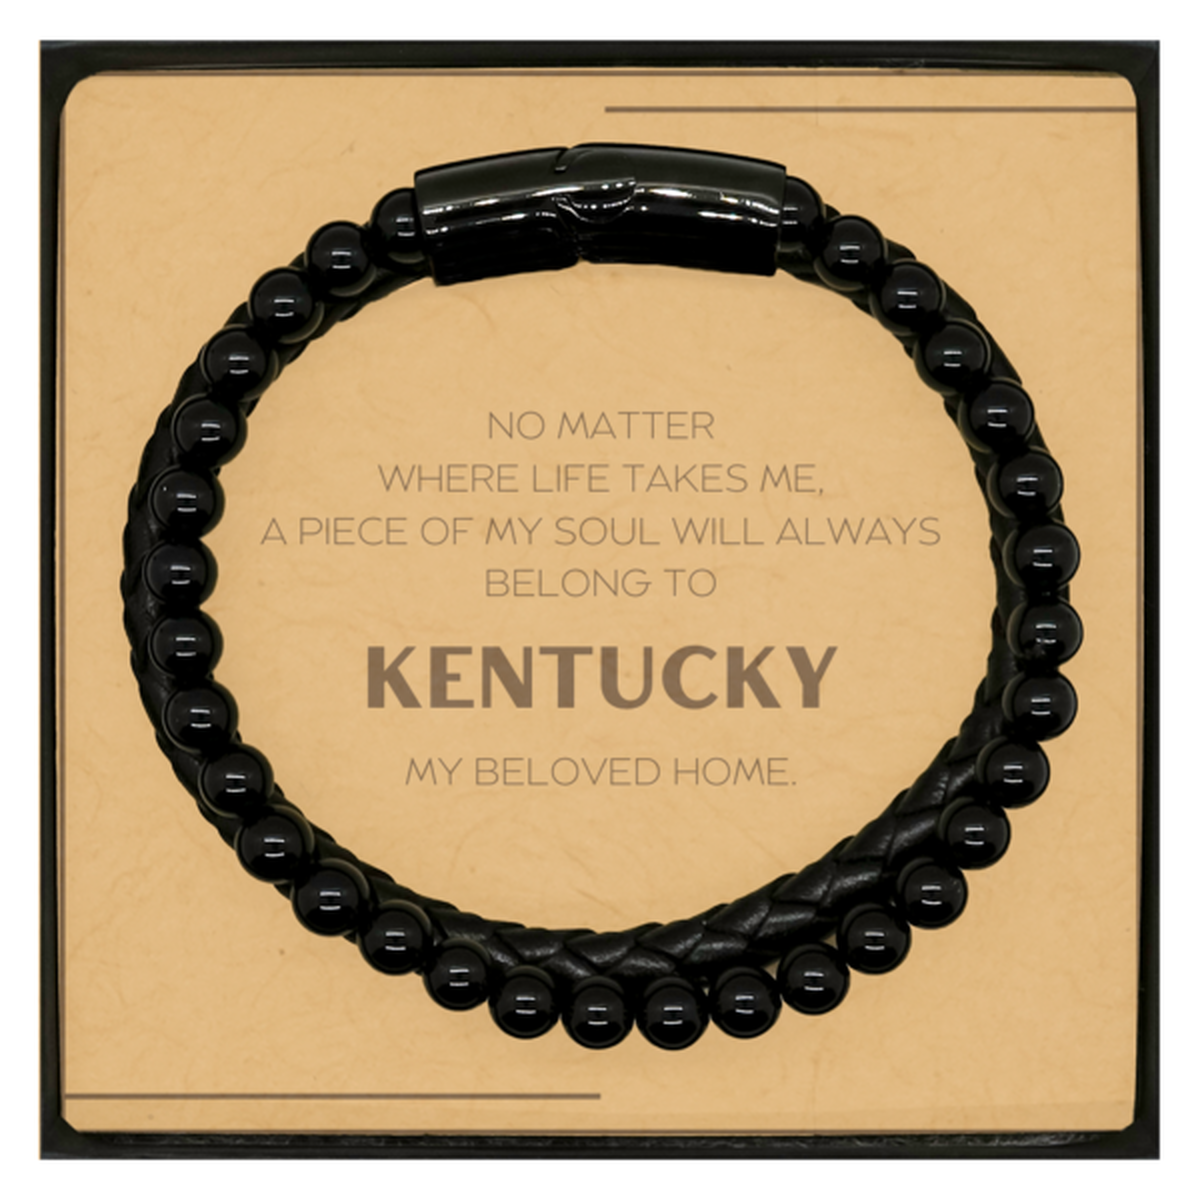 Love Kentucky State Gifts, My soul will always belong to Kentucky, Proud Stone Leather Bracelets, Birthday Christmas Unique Gifts For Kentucky Men, Women, Friends